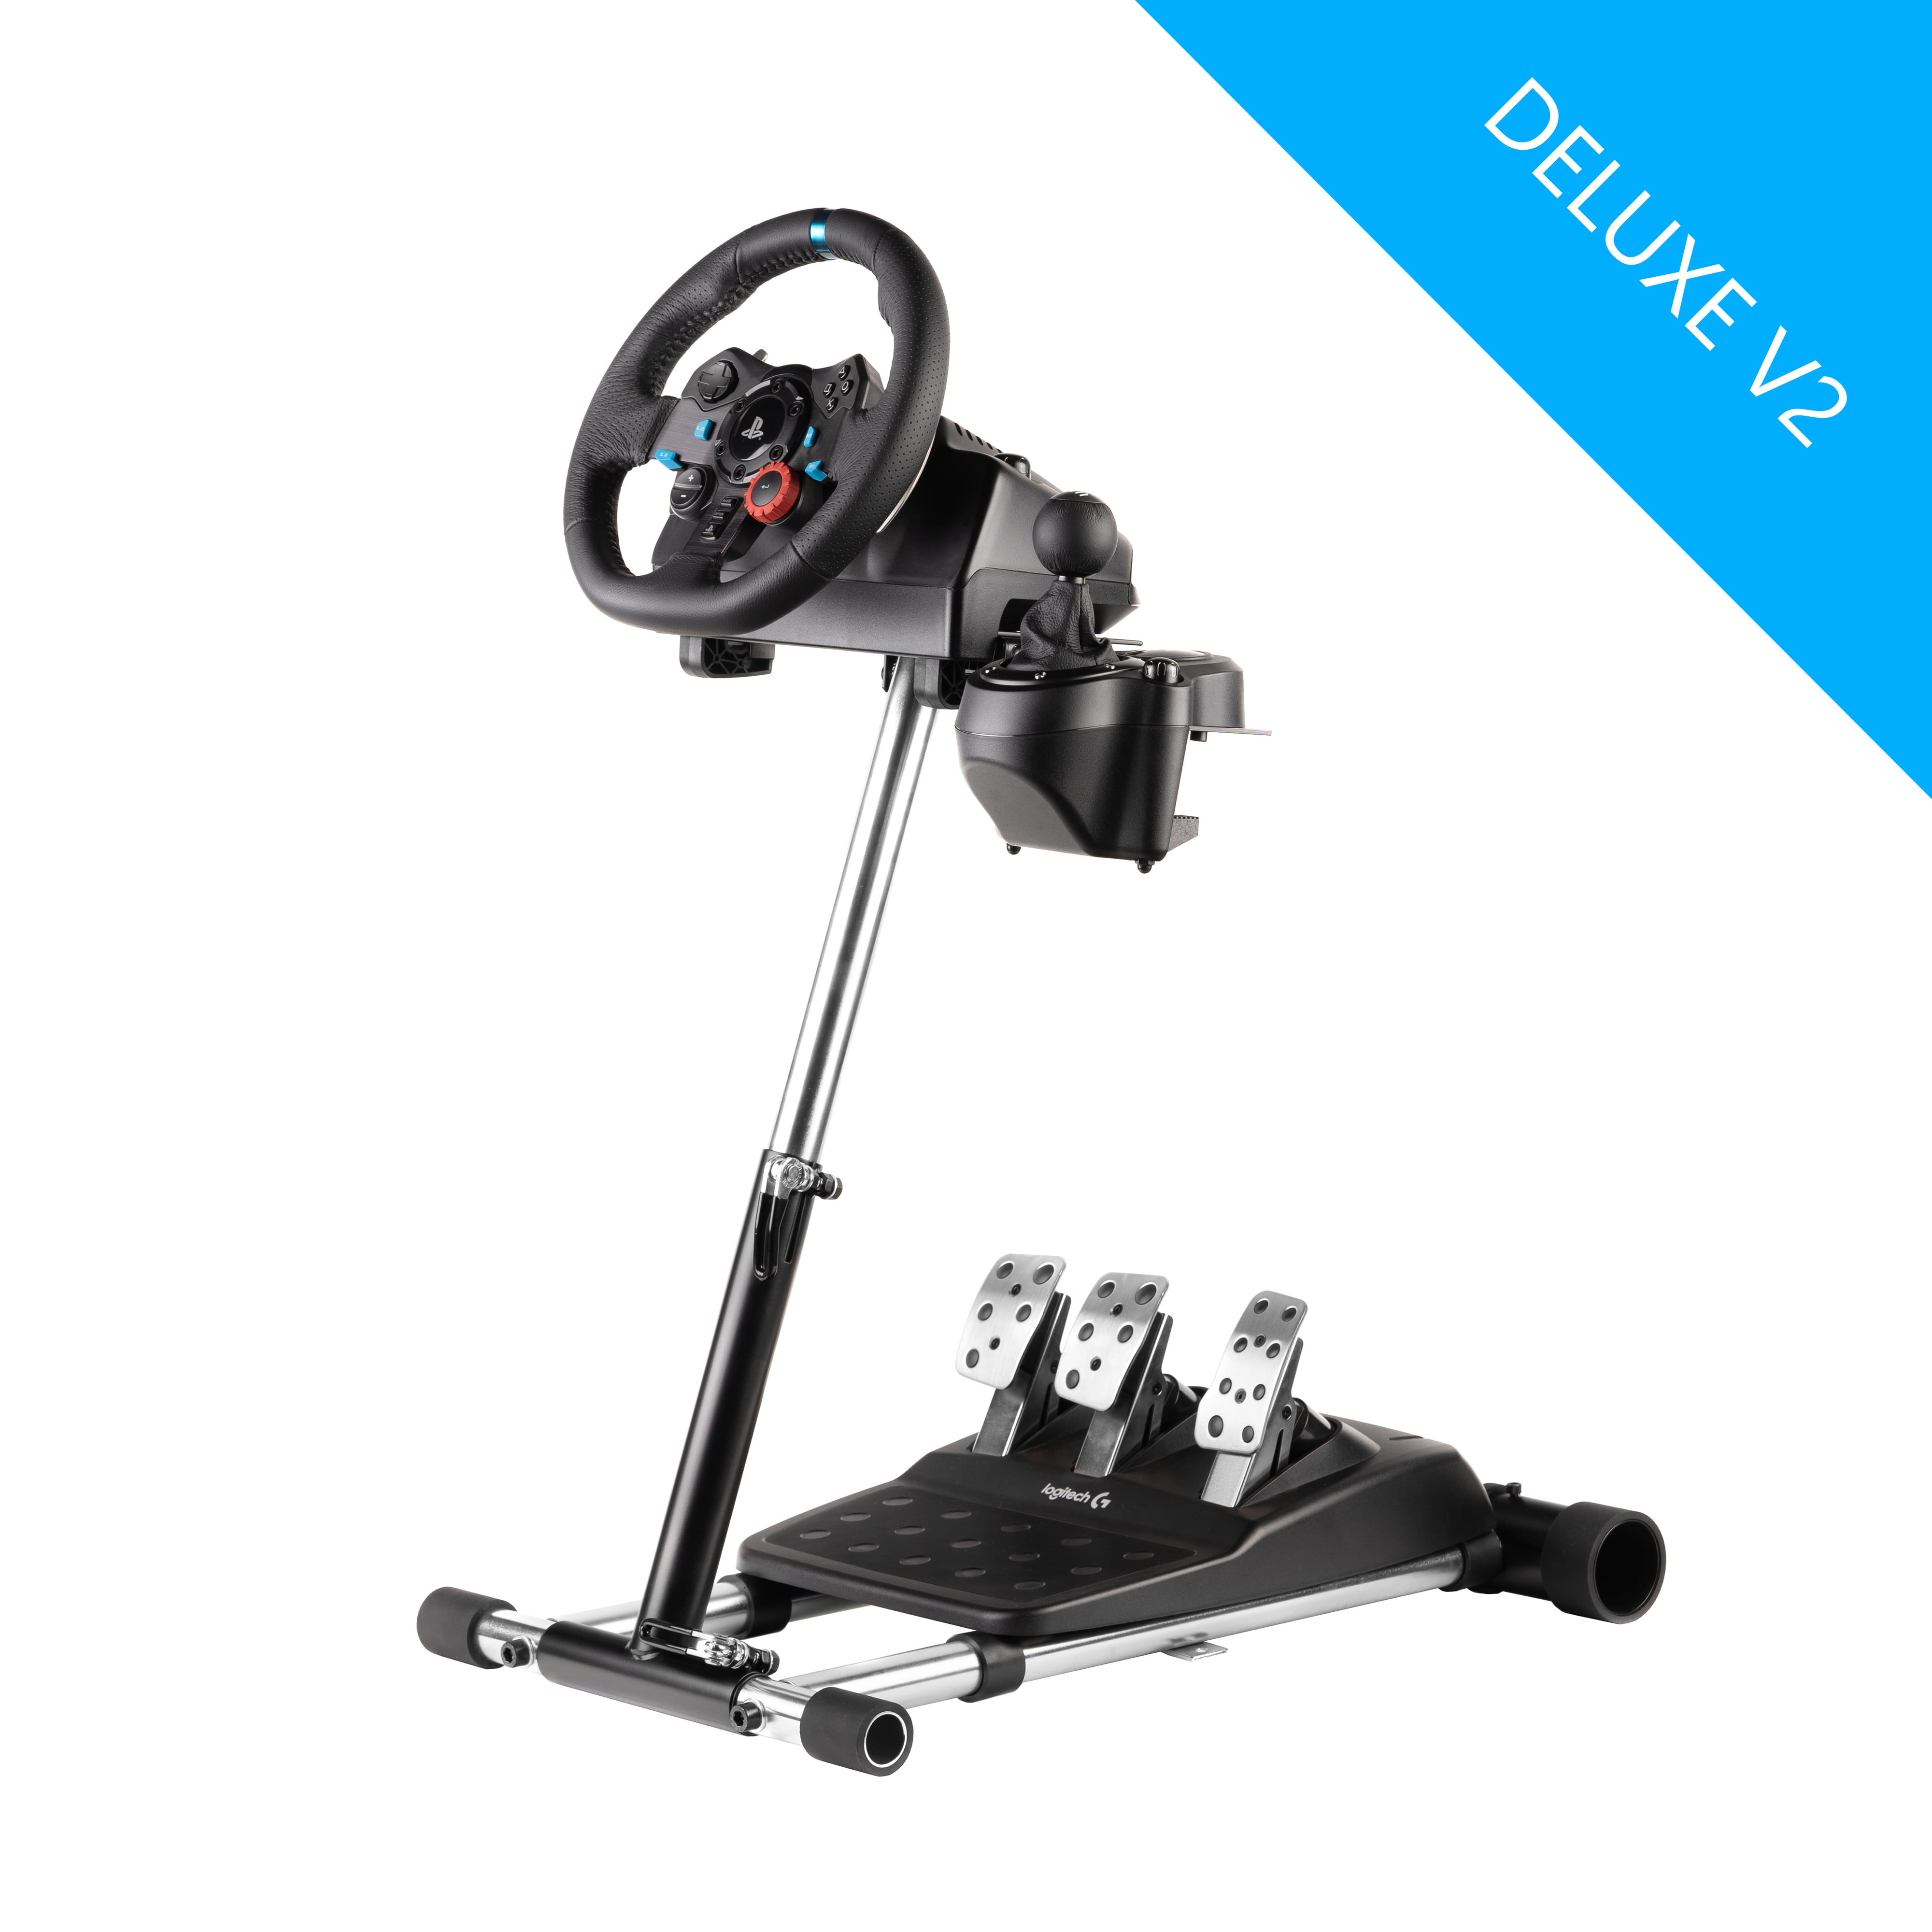 Wheel Stand Pro G Deluxe Wheel Stand Compatible With Logitech G29 G923 G920  G27 G25 wheels. Deluxe V2. Wheel and Pedals not included.